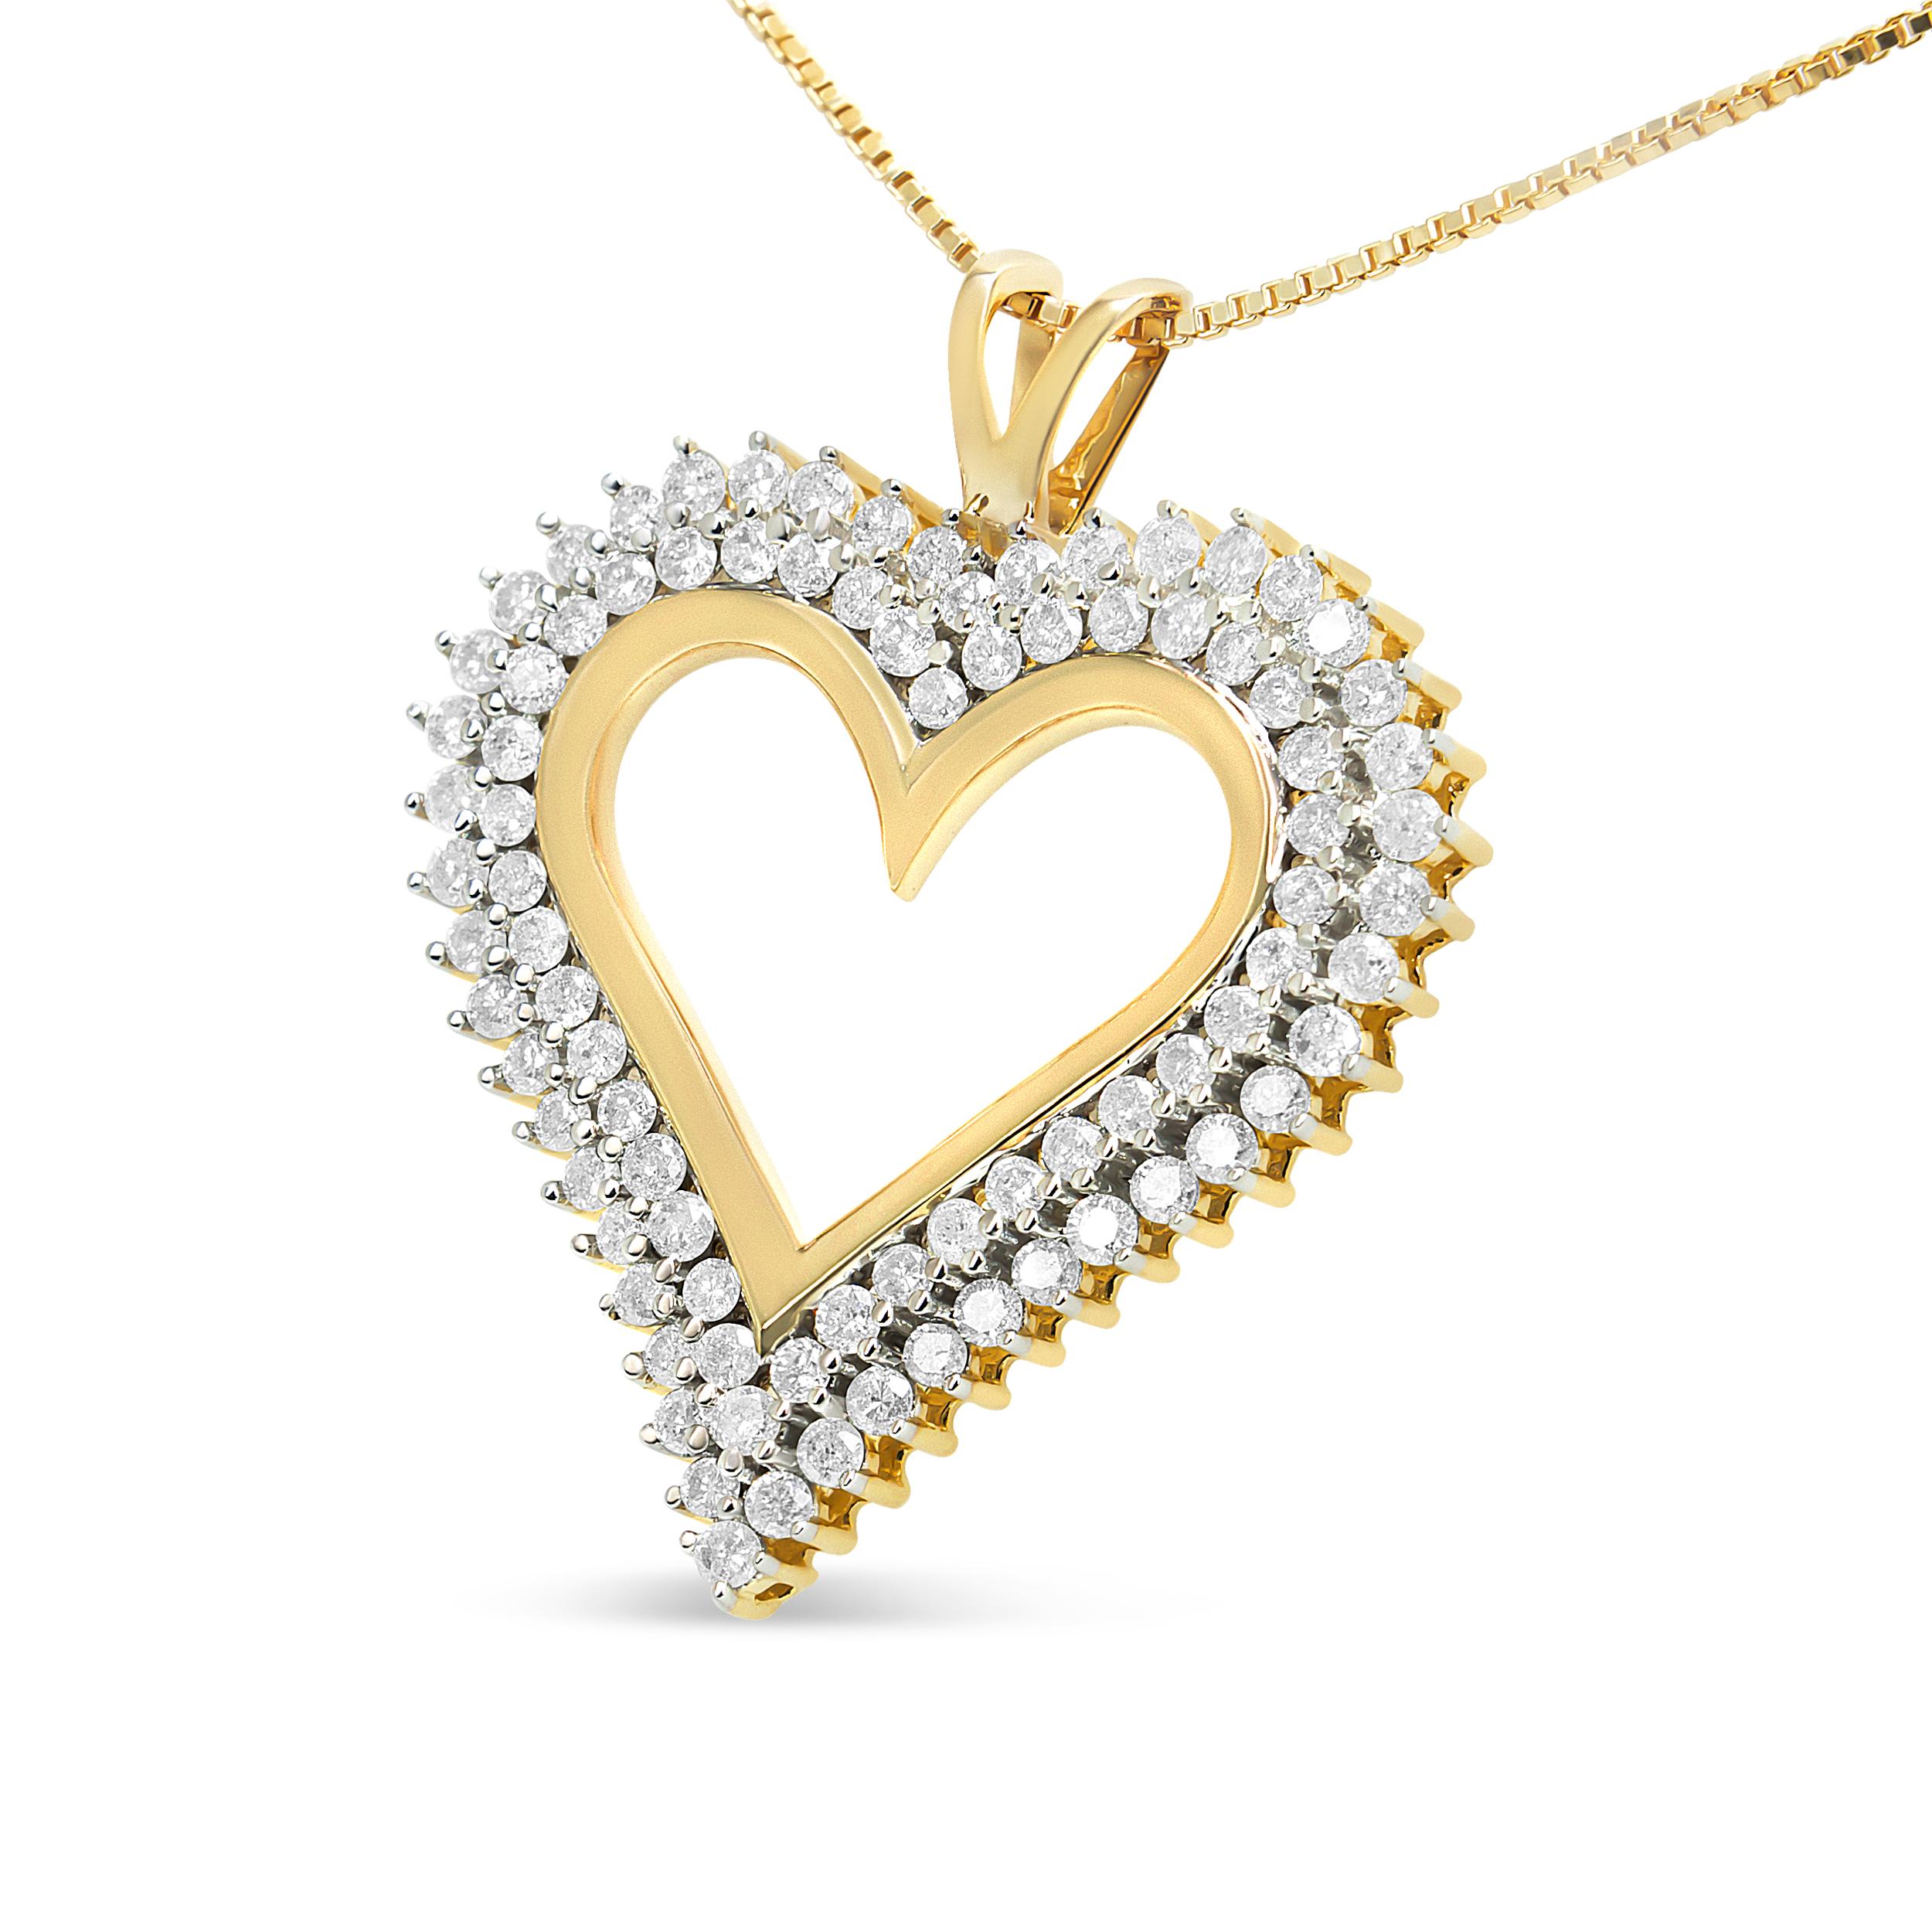 Celebrate someone you love with this stunning diamond heart pendant. This diamond necklace features 2 rows of round diamonds prong set along the edge of this open heart shape crafted of stunning .925 sterling silver, with a matching box chain